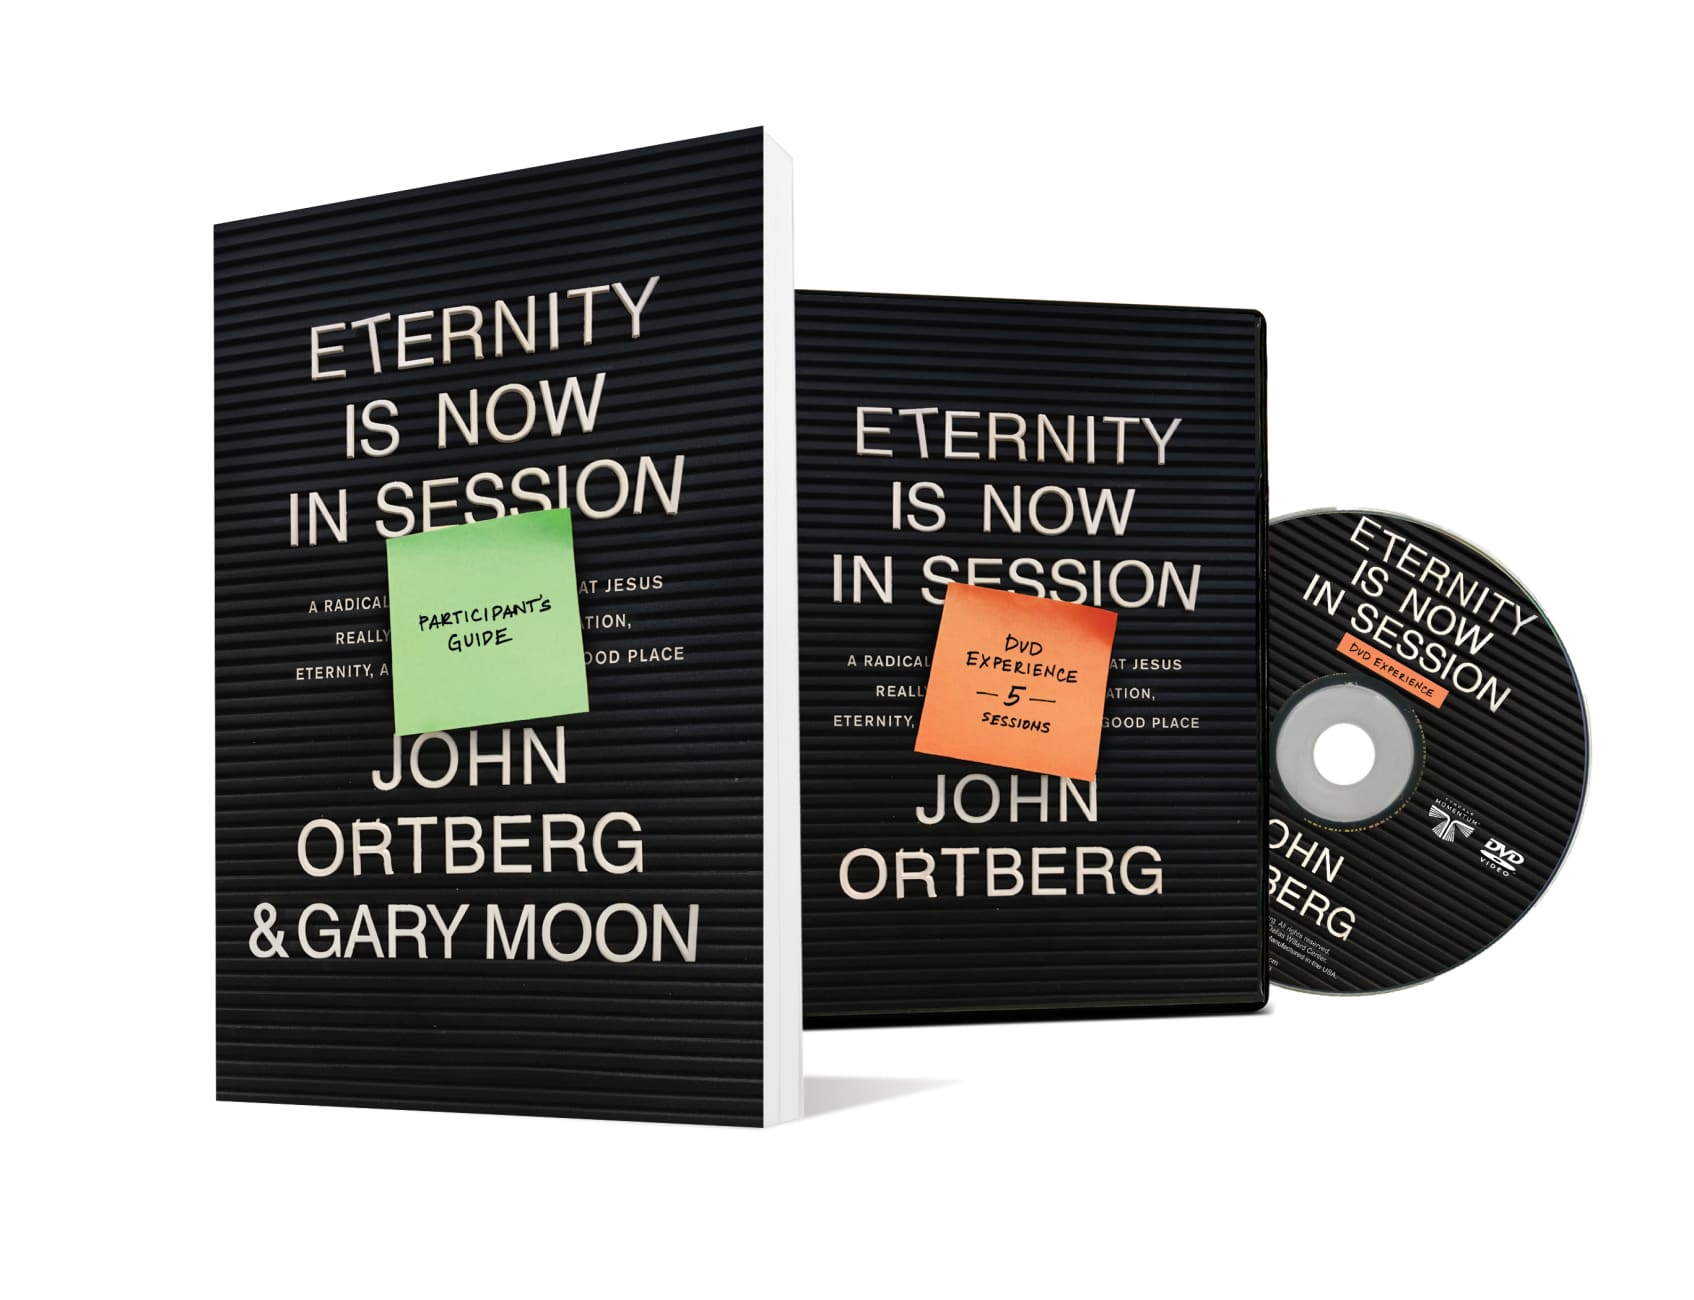 Eternity is Now in Session: A Radical Rediscovery of What Jesus Really Taught About Salvation, Eternity, and Getting to the Good Place (Participants Guide With Dvd) Pack